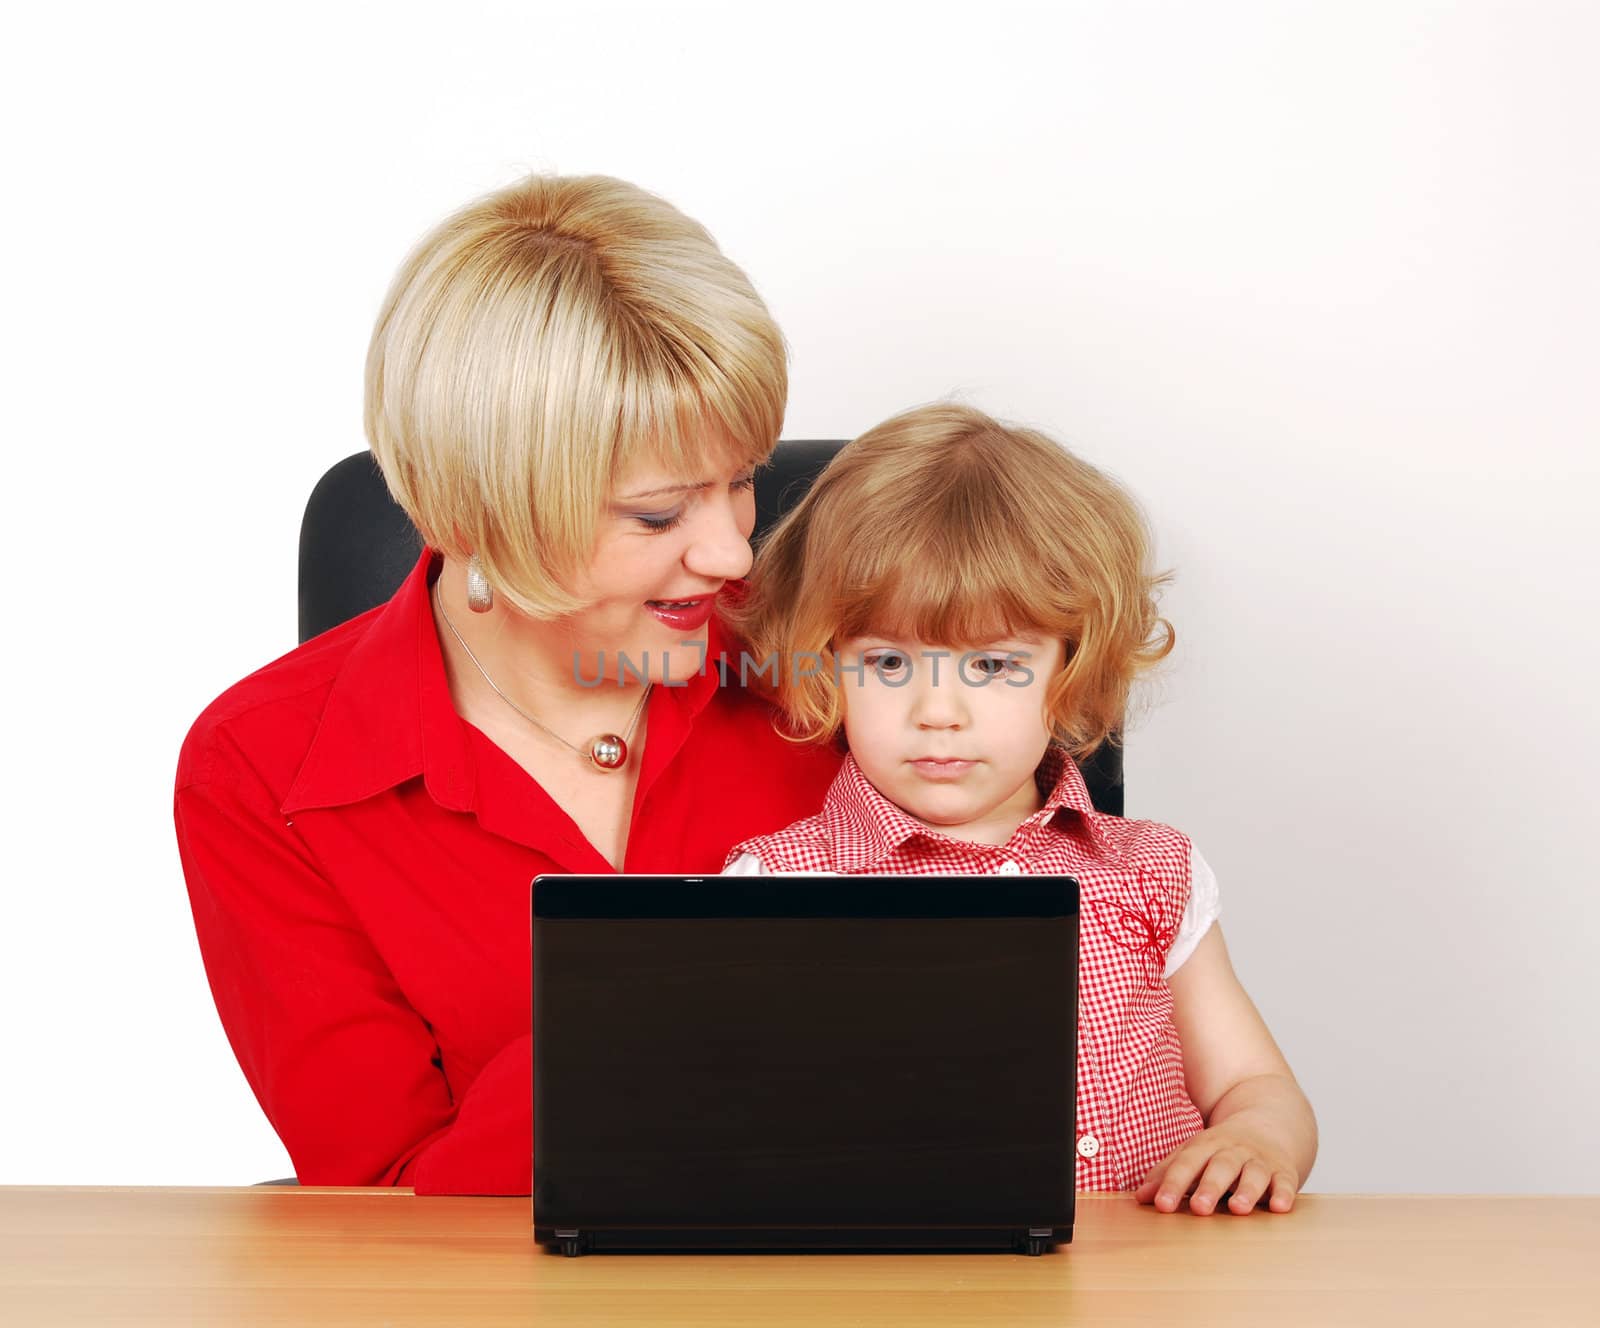 Woman and little girl with laptop studio shot